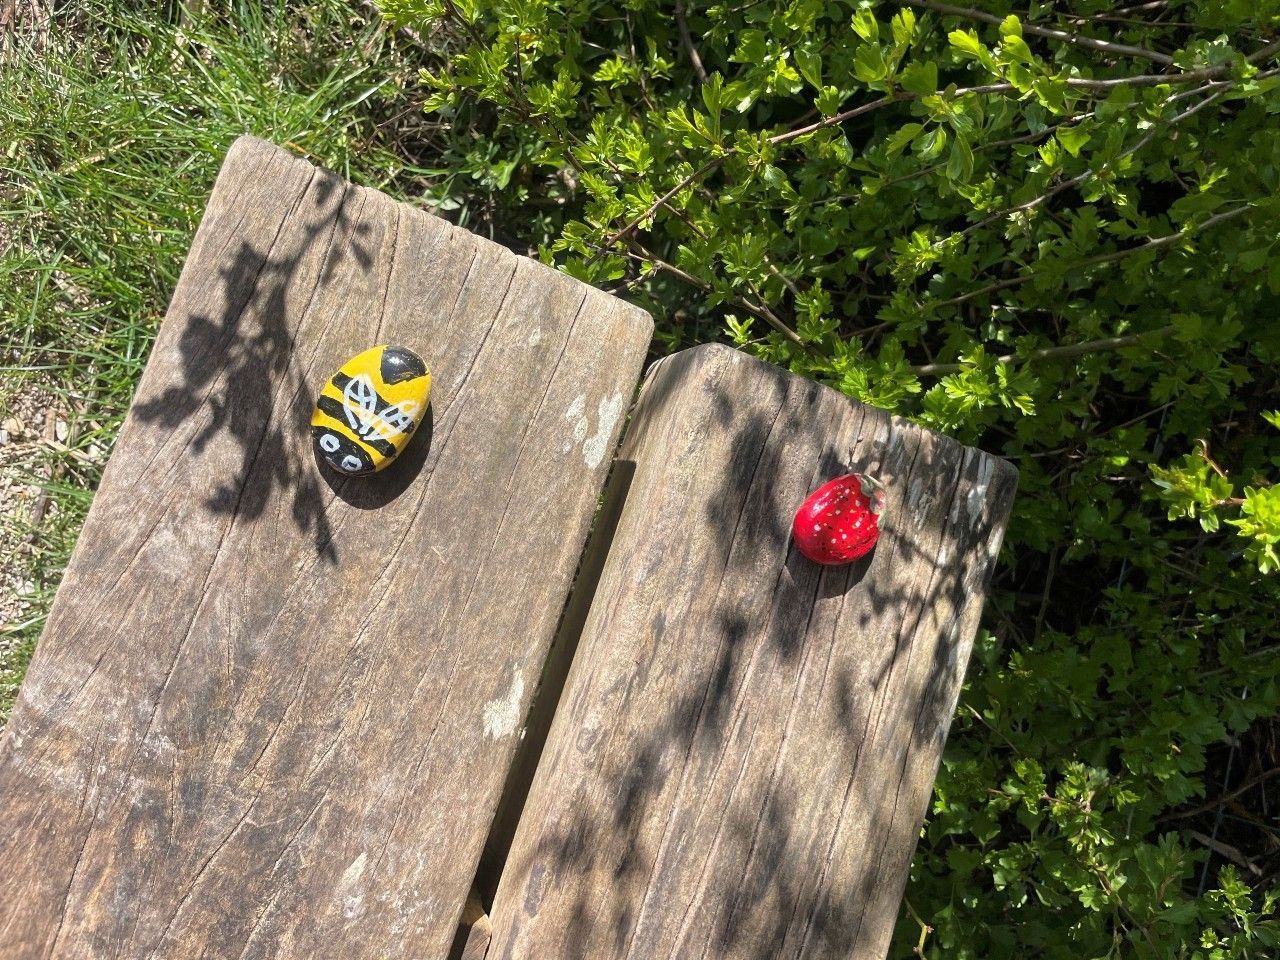 Painted rocks to look like insects on a bench